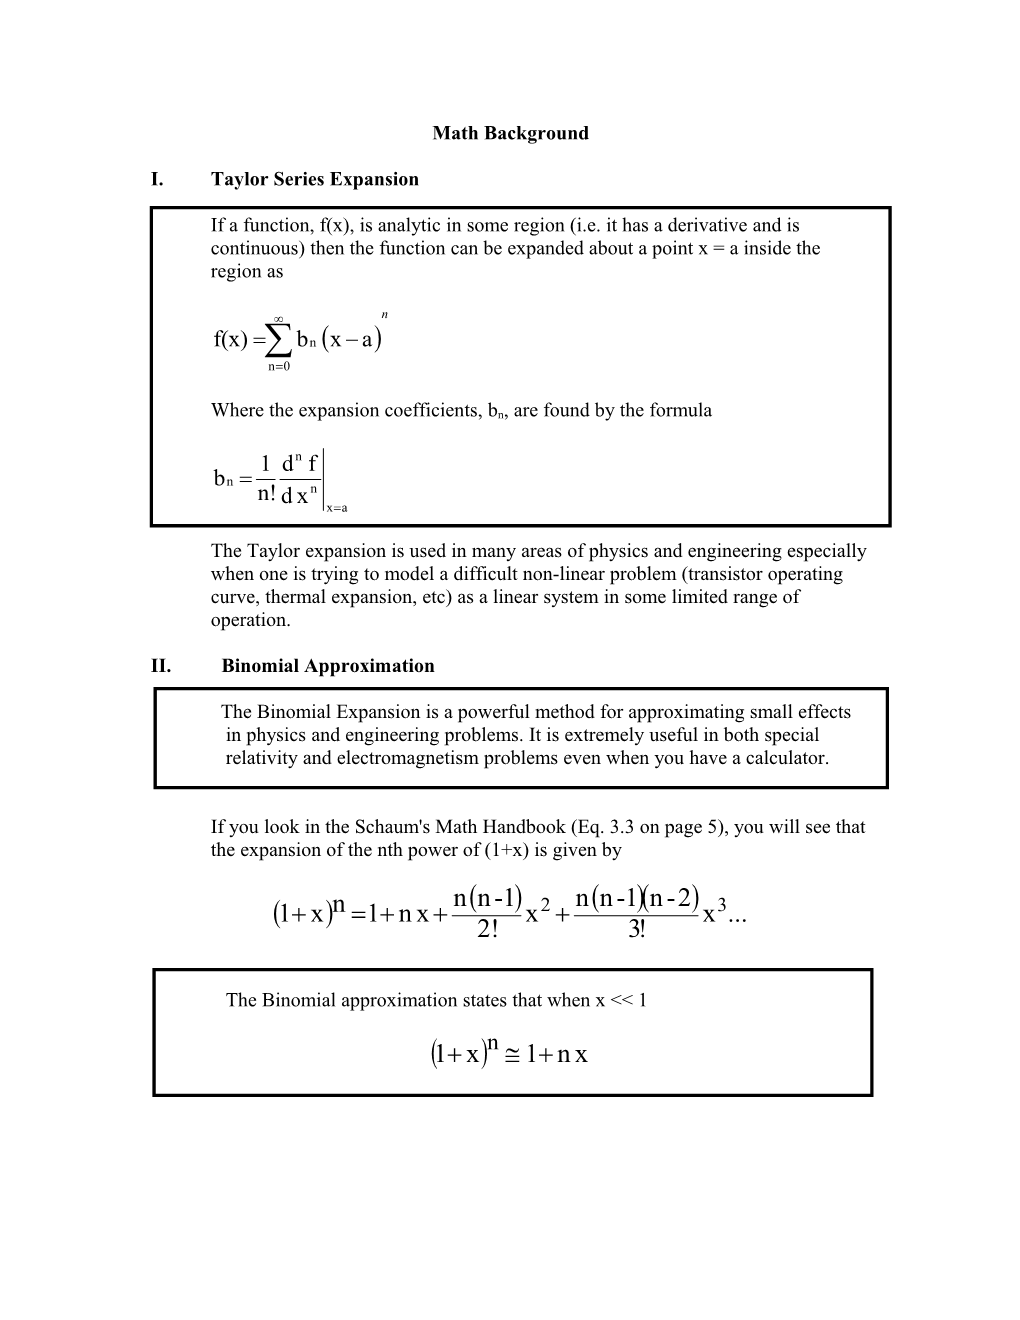 I. Taylor Series Expansion